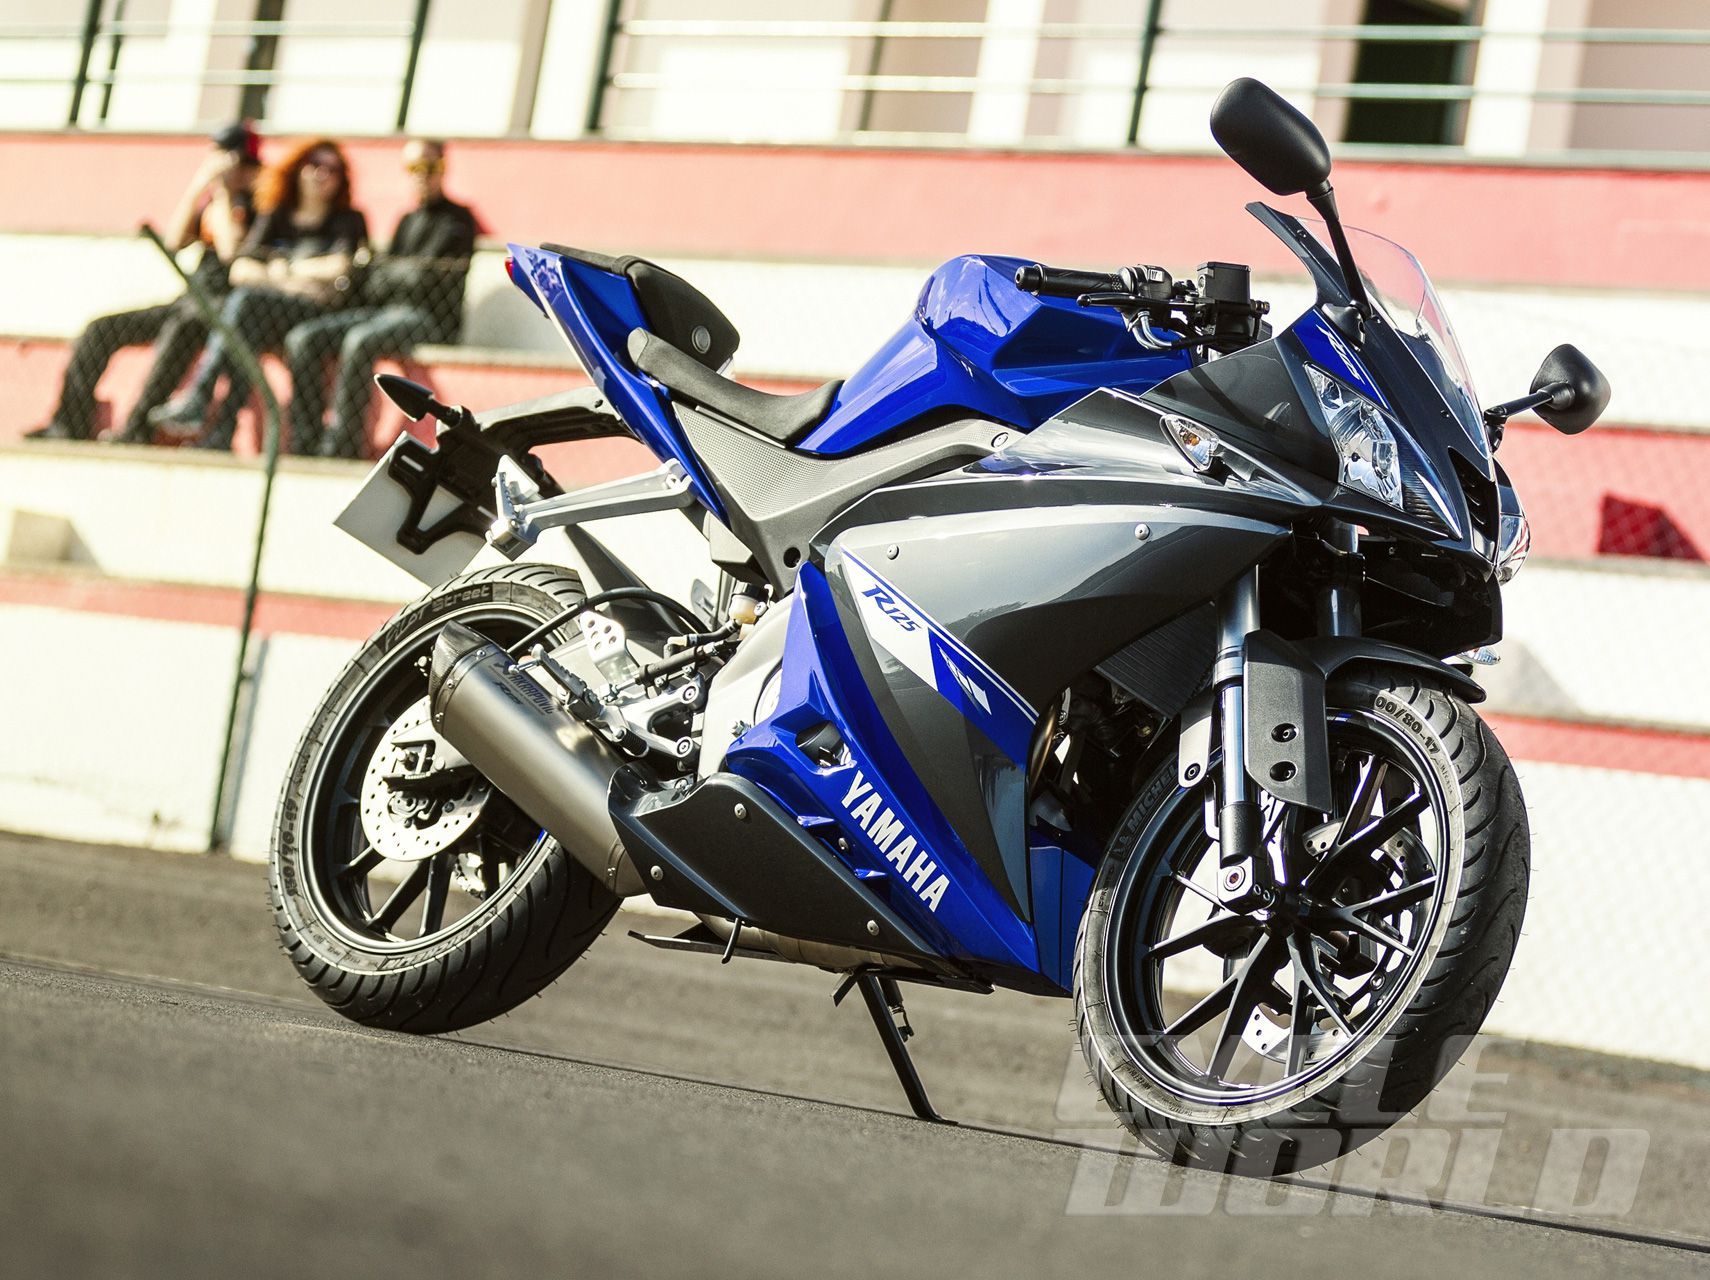 Yamaha YZF R125 Sportbike First Look Review Photo. Cycle